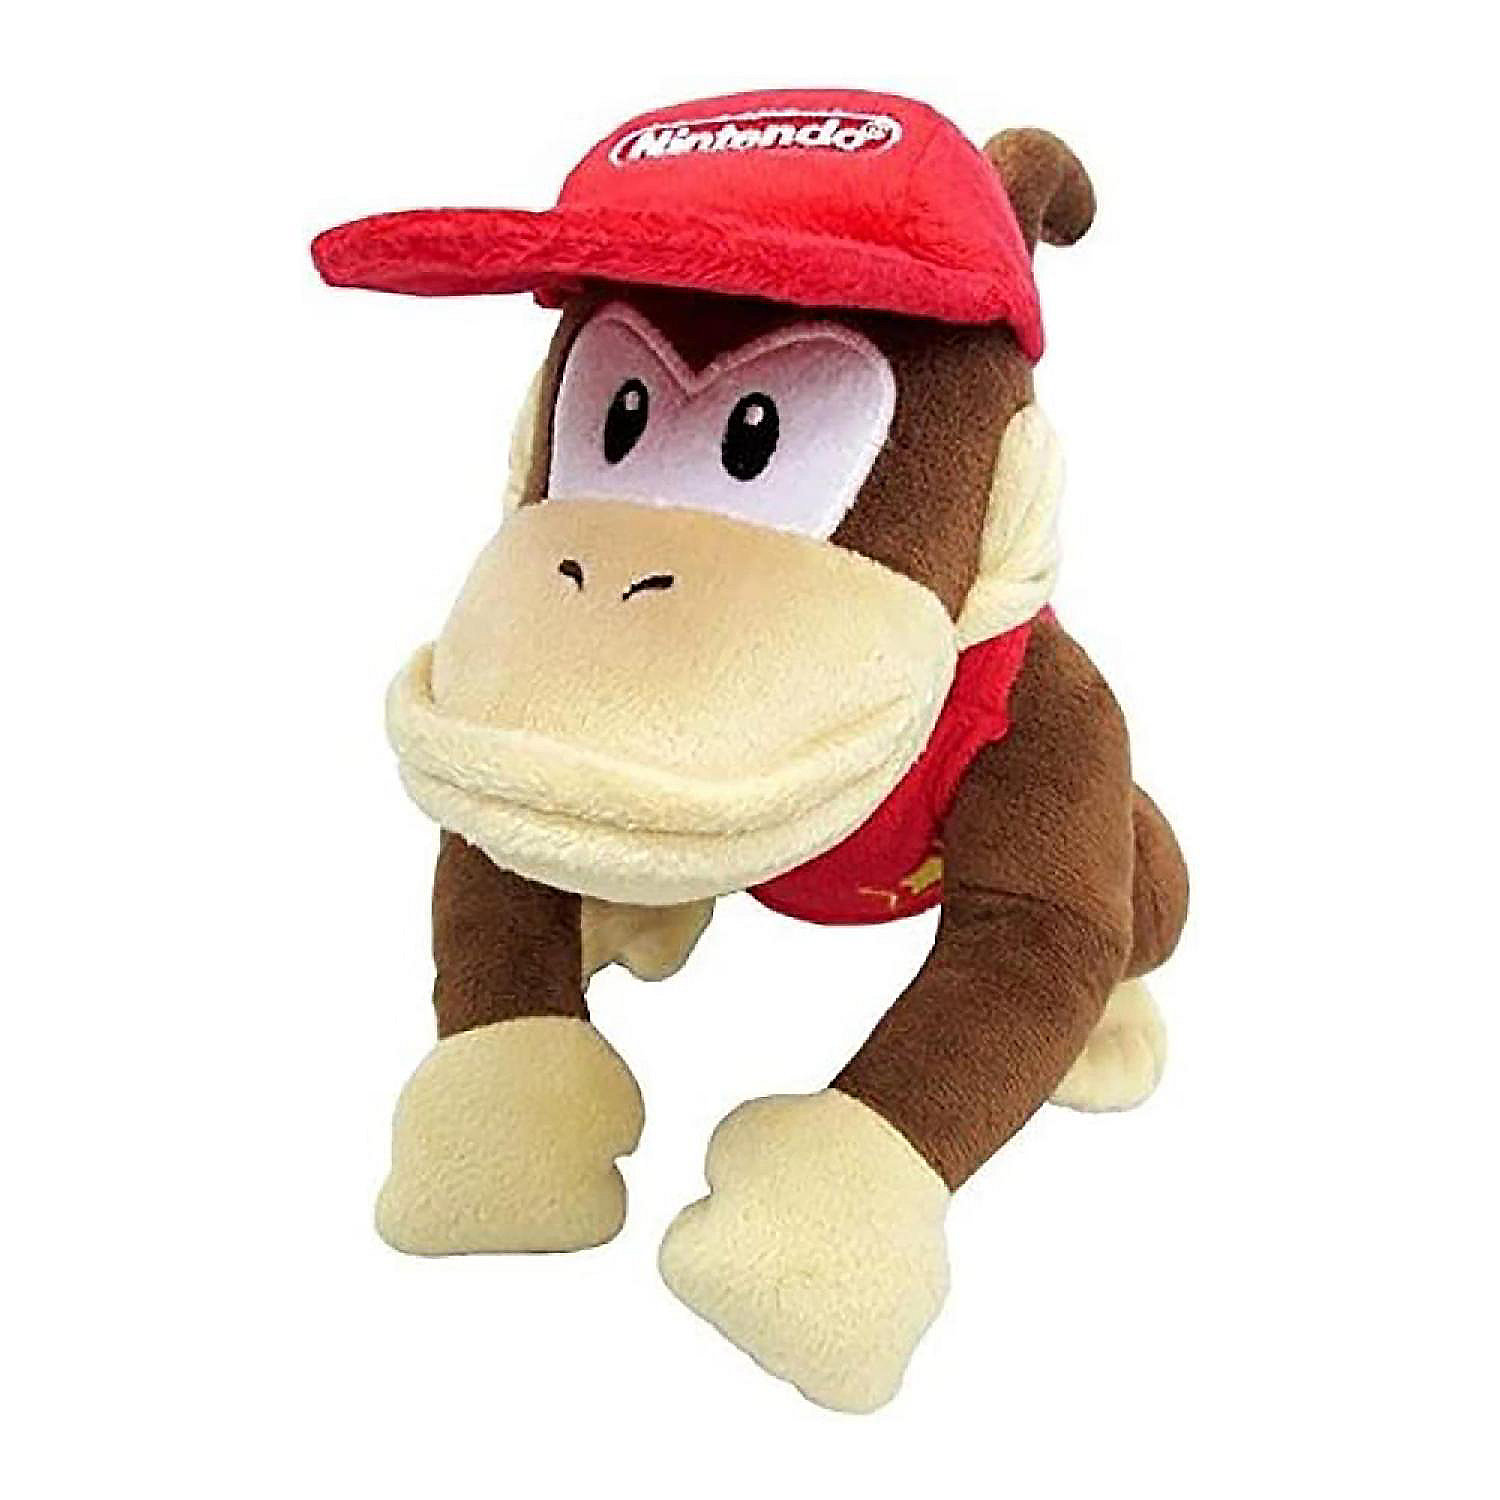 Super Mario All Star Collection 7 Inch Plush Diddy Kong | Oriental Trading